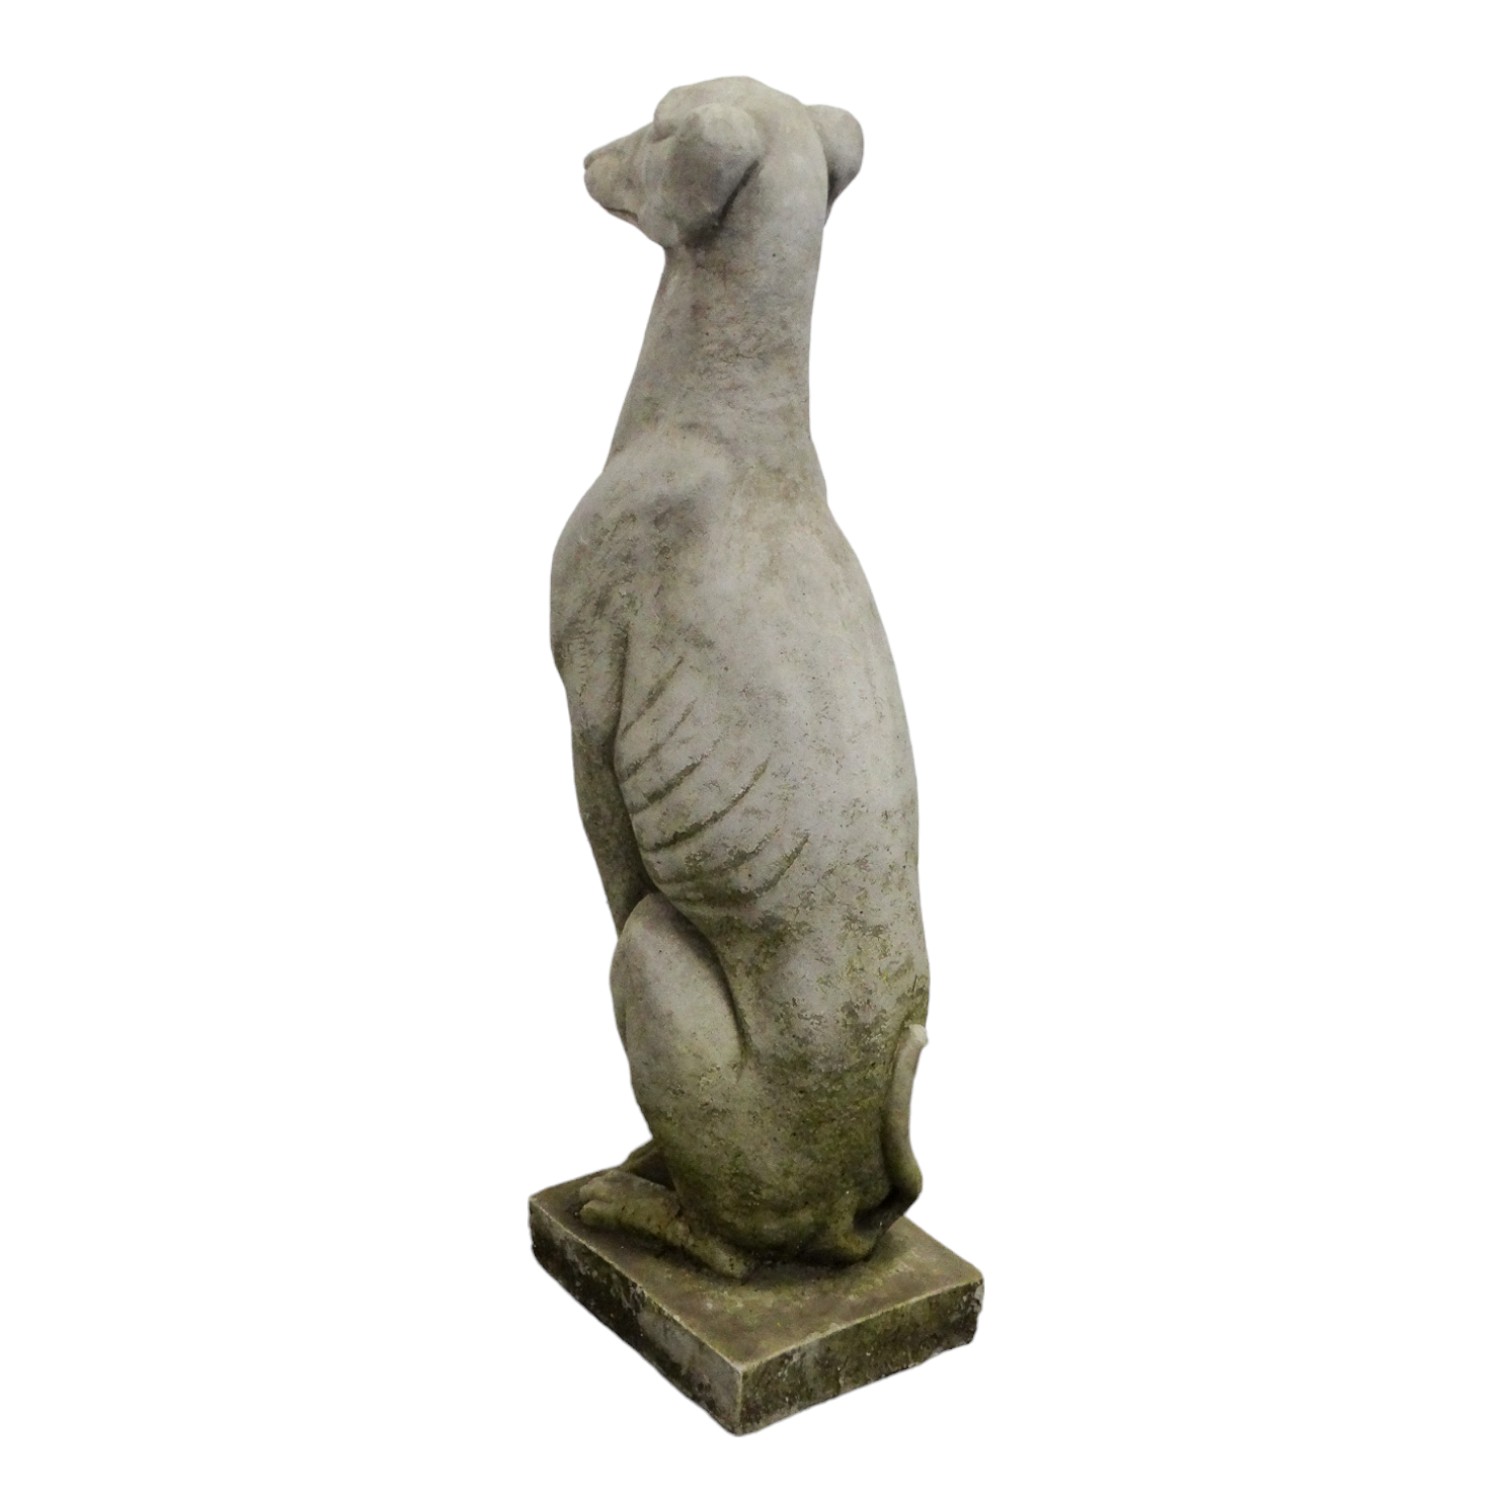 Pair of reconstituted stone dogs - seated alert pose, 55cm high - Image 3 of 10